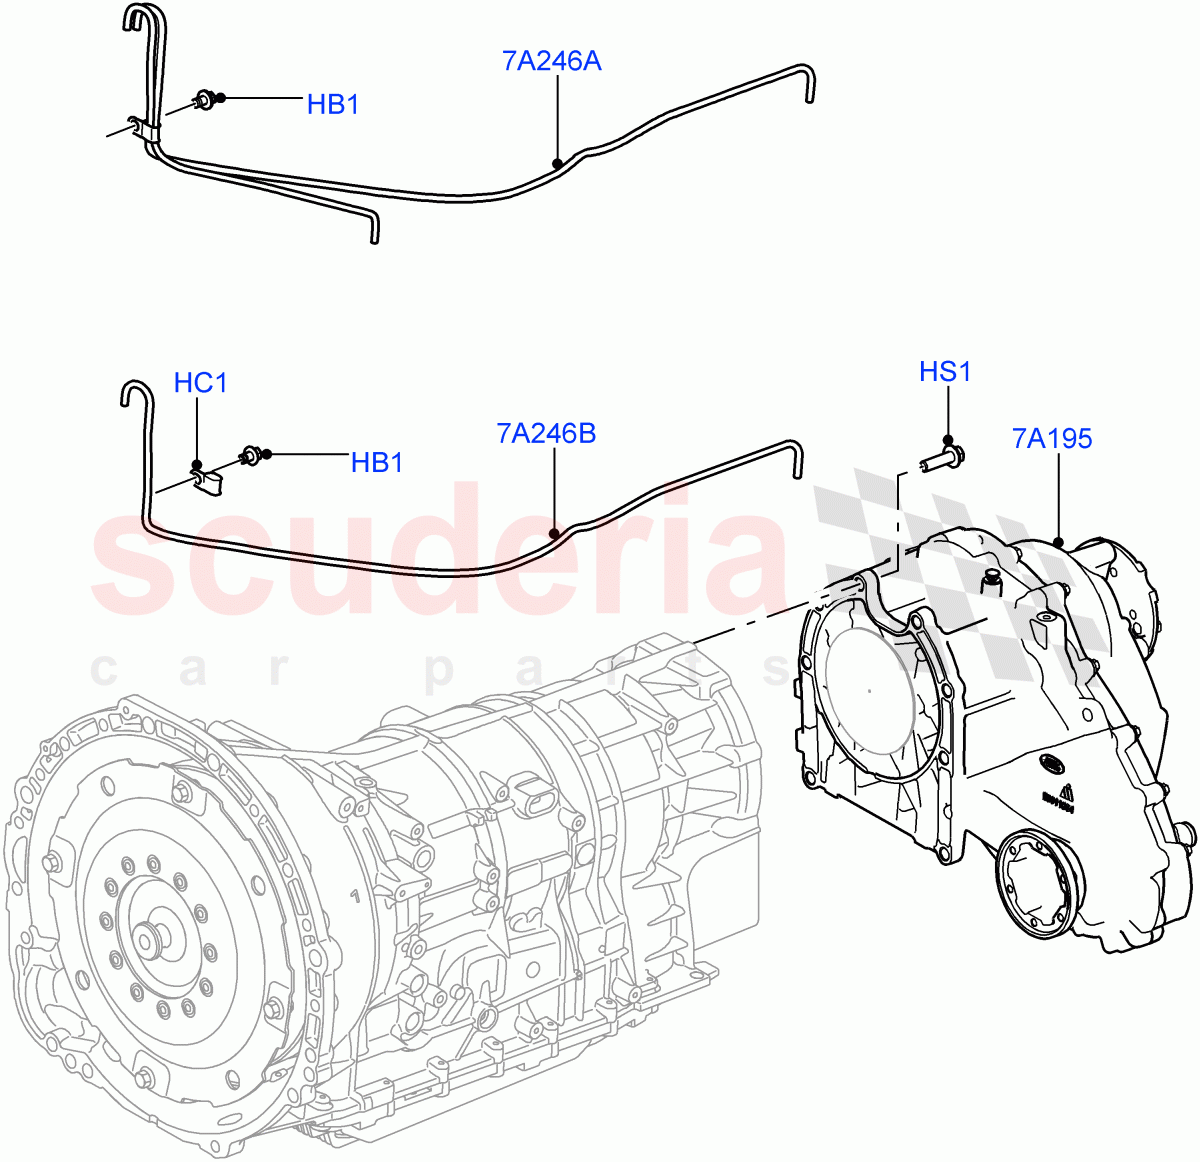 Transfer Drive Case(8 Speed Auto Trans ZF 8HP70 4WD,With 1 Speed Transfer Case,8 Speed Auto Trans ZF 8HP45)((V)FROMEA000001,(V)TOGA999999) of Land Rover Land Rover Range Rover (2012-2021) [4.4 DOHC Diesel V8 DITC]